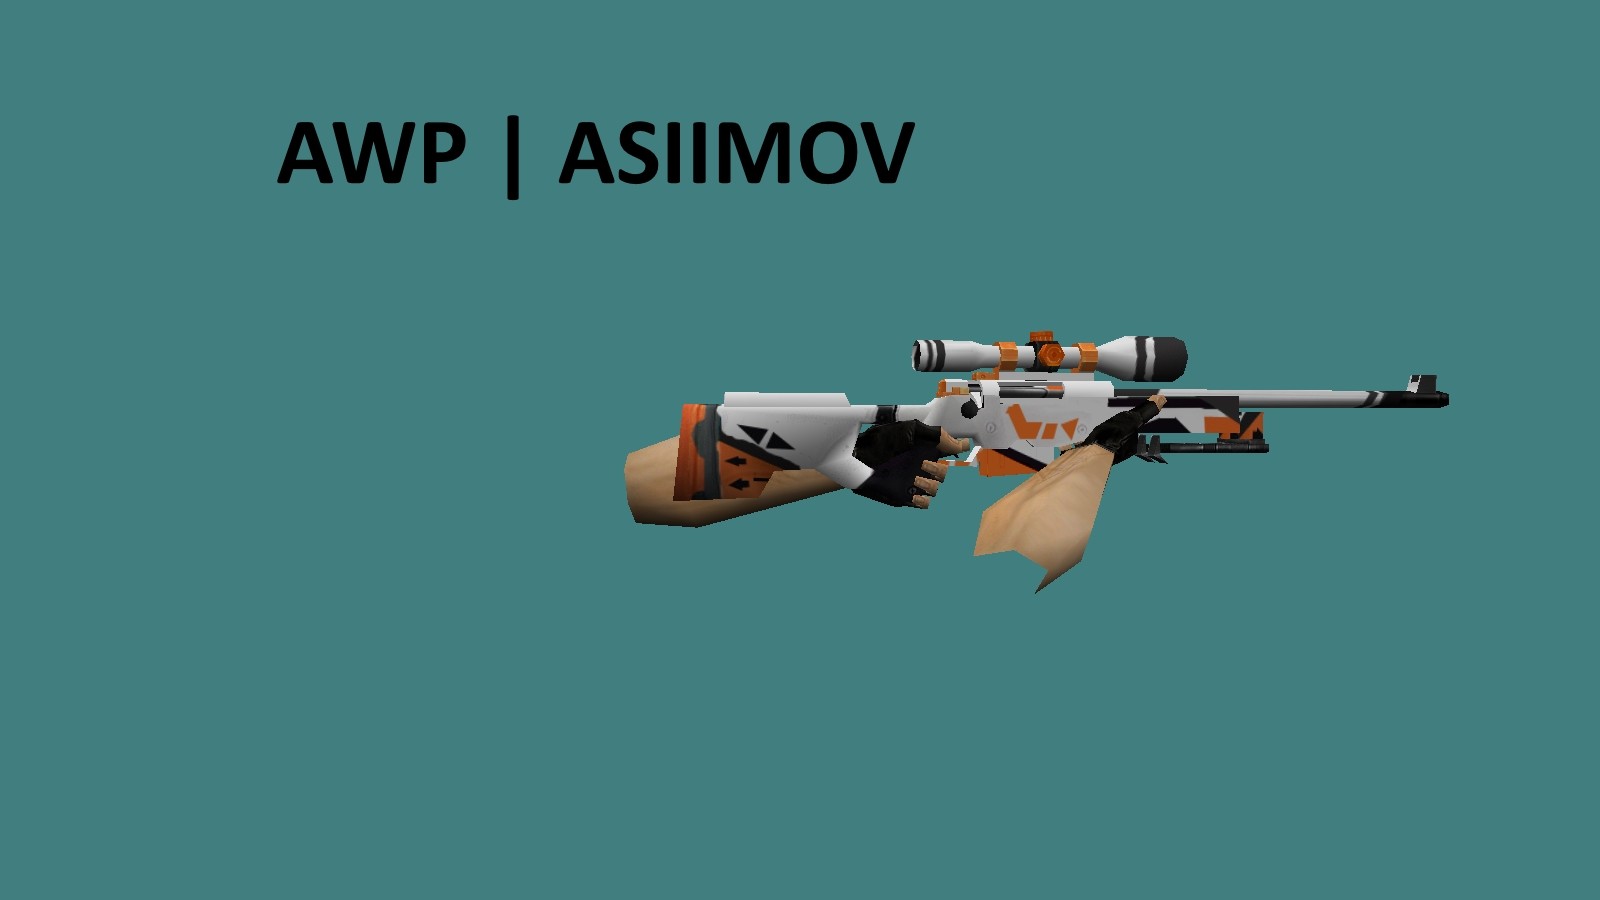 Picture Gallery Awp Asiimov Wallpaper Image On Pc Mobile Thumbily